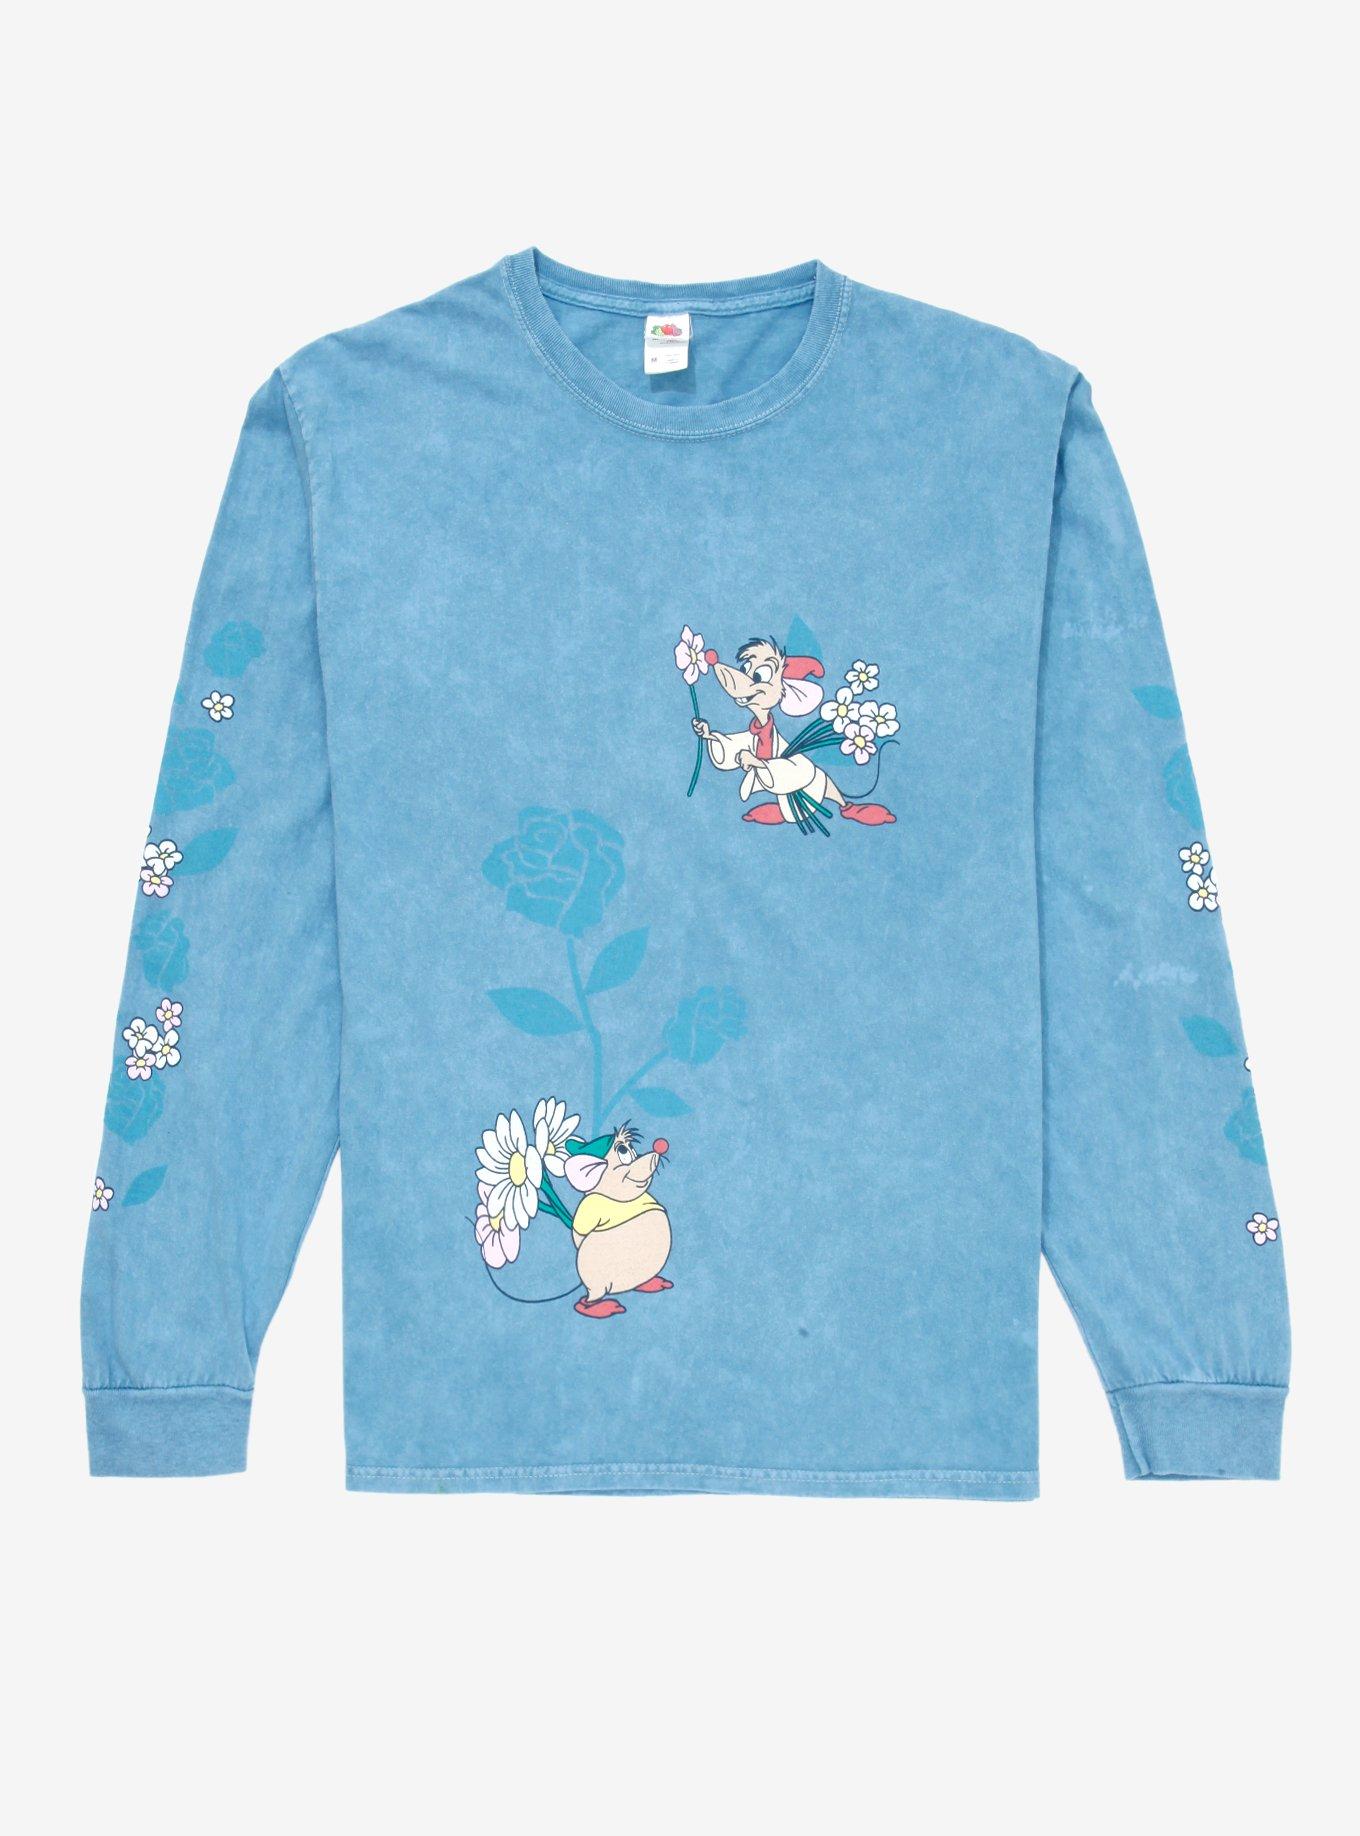 Disney Cinderella Jaq & Gus with Flowers Long Sleeve T-Shirt - BoxLunch Exclusive, LIGHT BLUE, hi-res